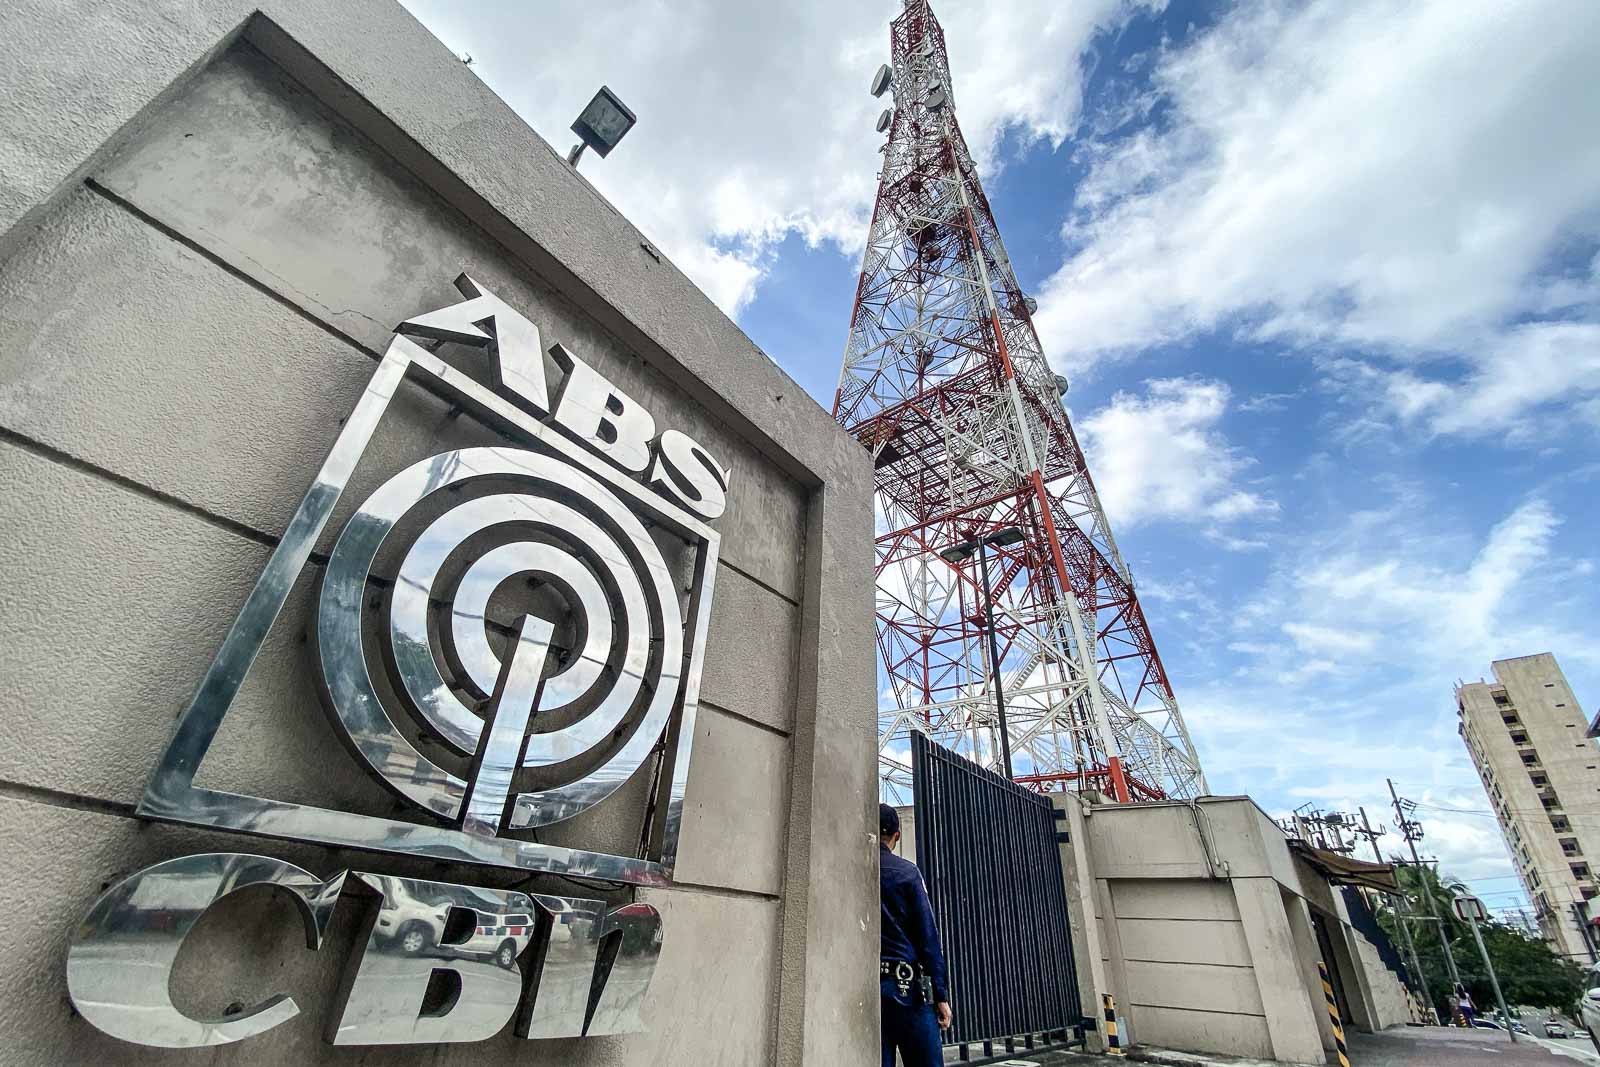 FRANCHISE UNDER PERIL. The facade of the ABS-CBN Broadcasting Center in Quezon City. File photo by Jire Carreon/Rappler 